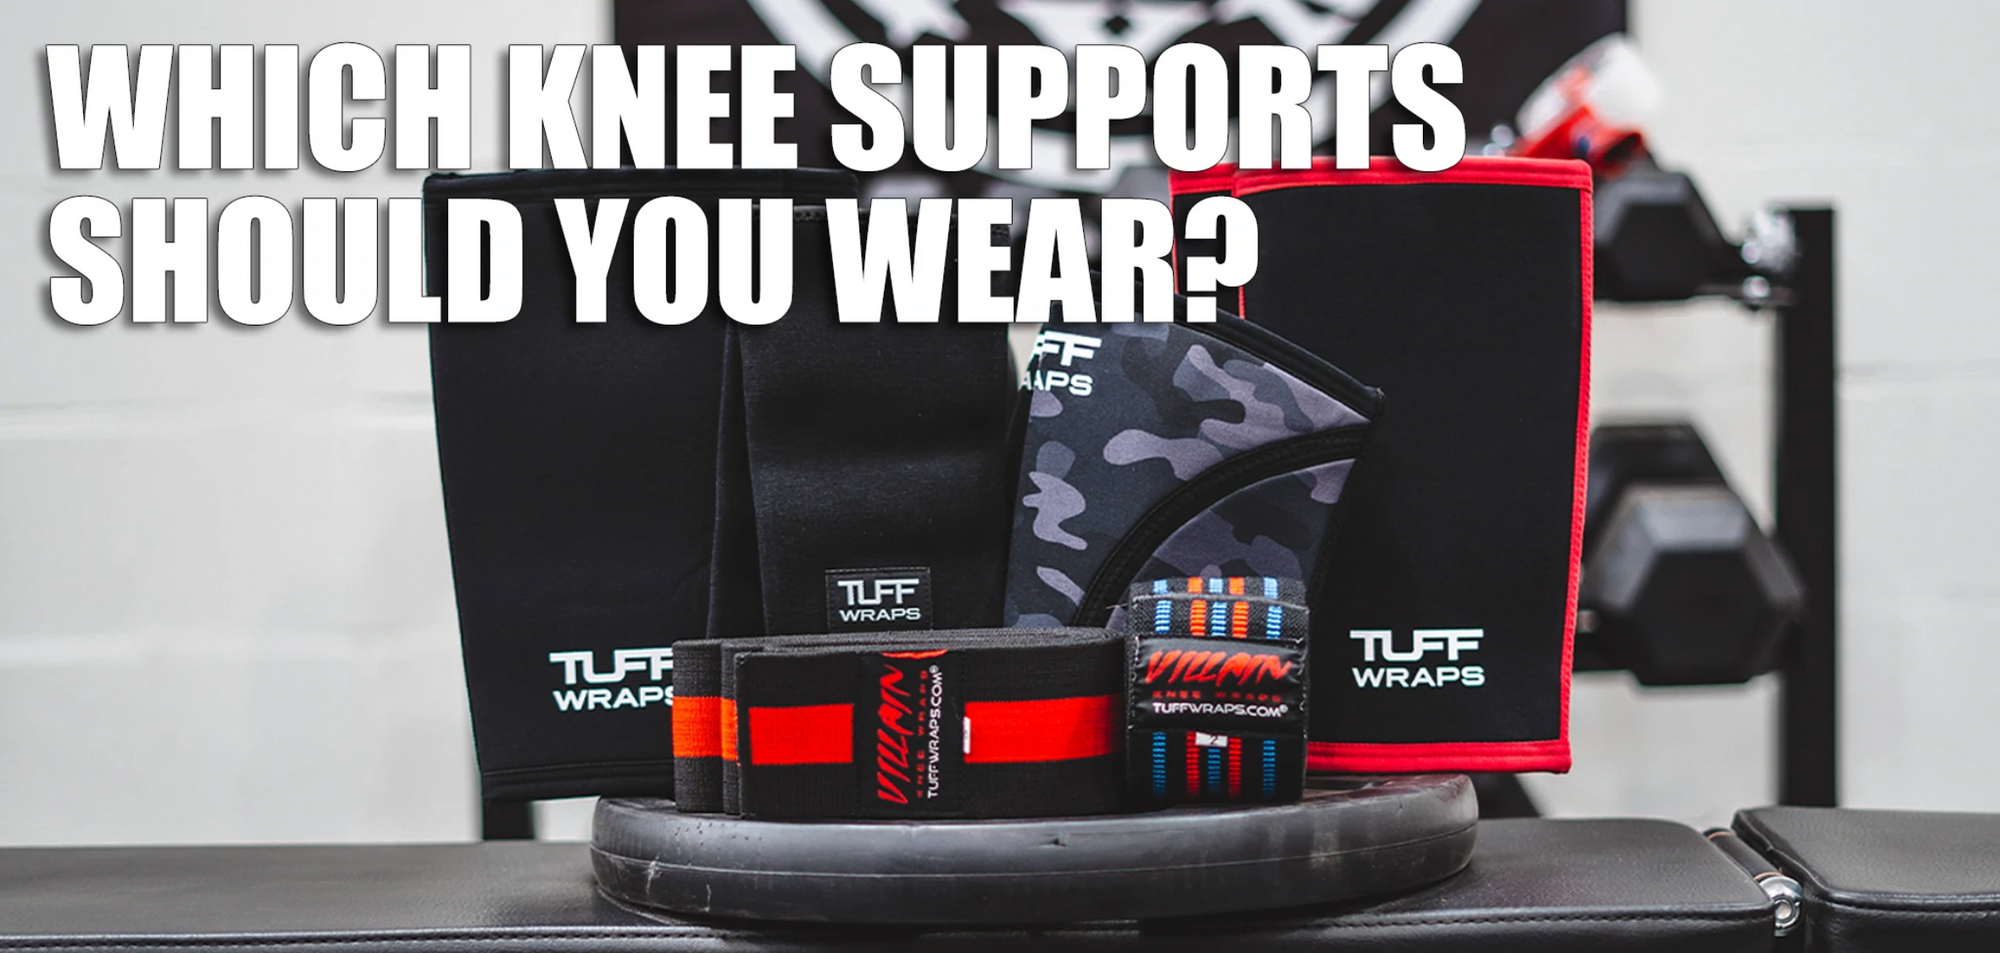 Knee Supports - Which Ones Should You Choose?